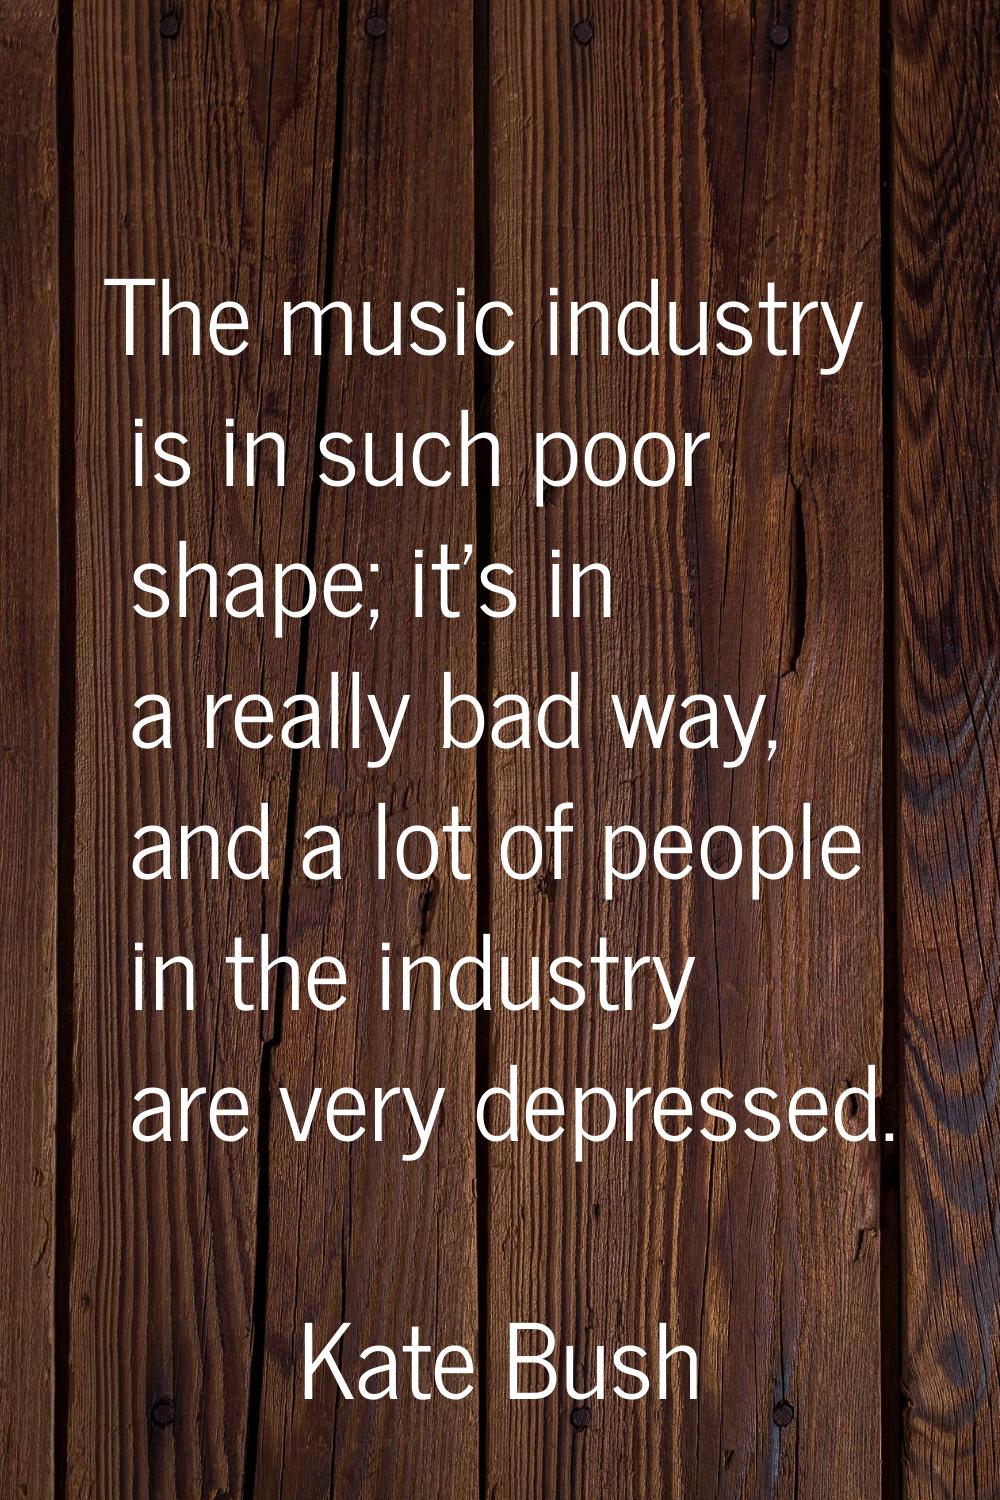 The music industry is in such poor shape; it's in a really bad way, and a lot of people in the indu